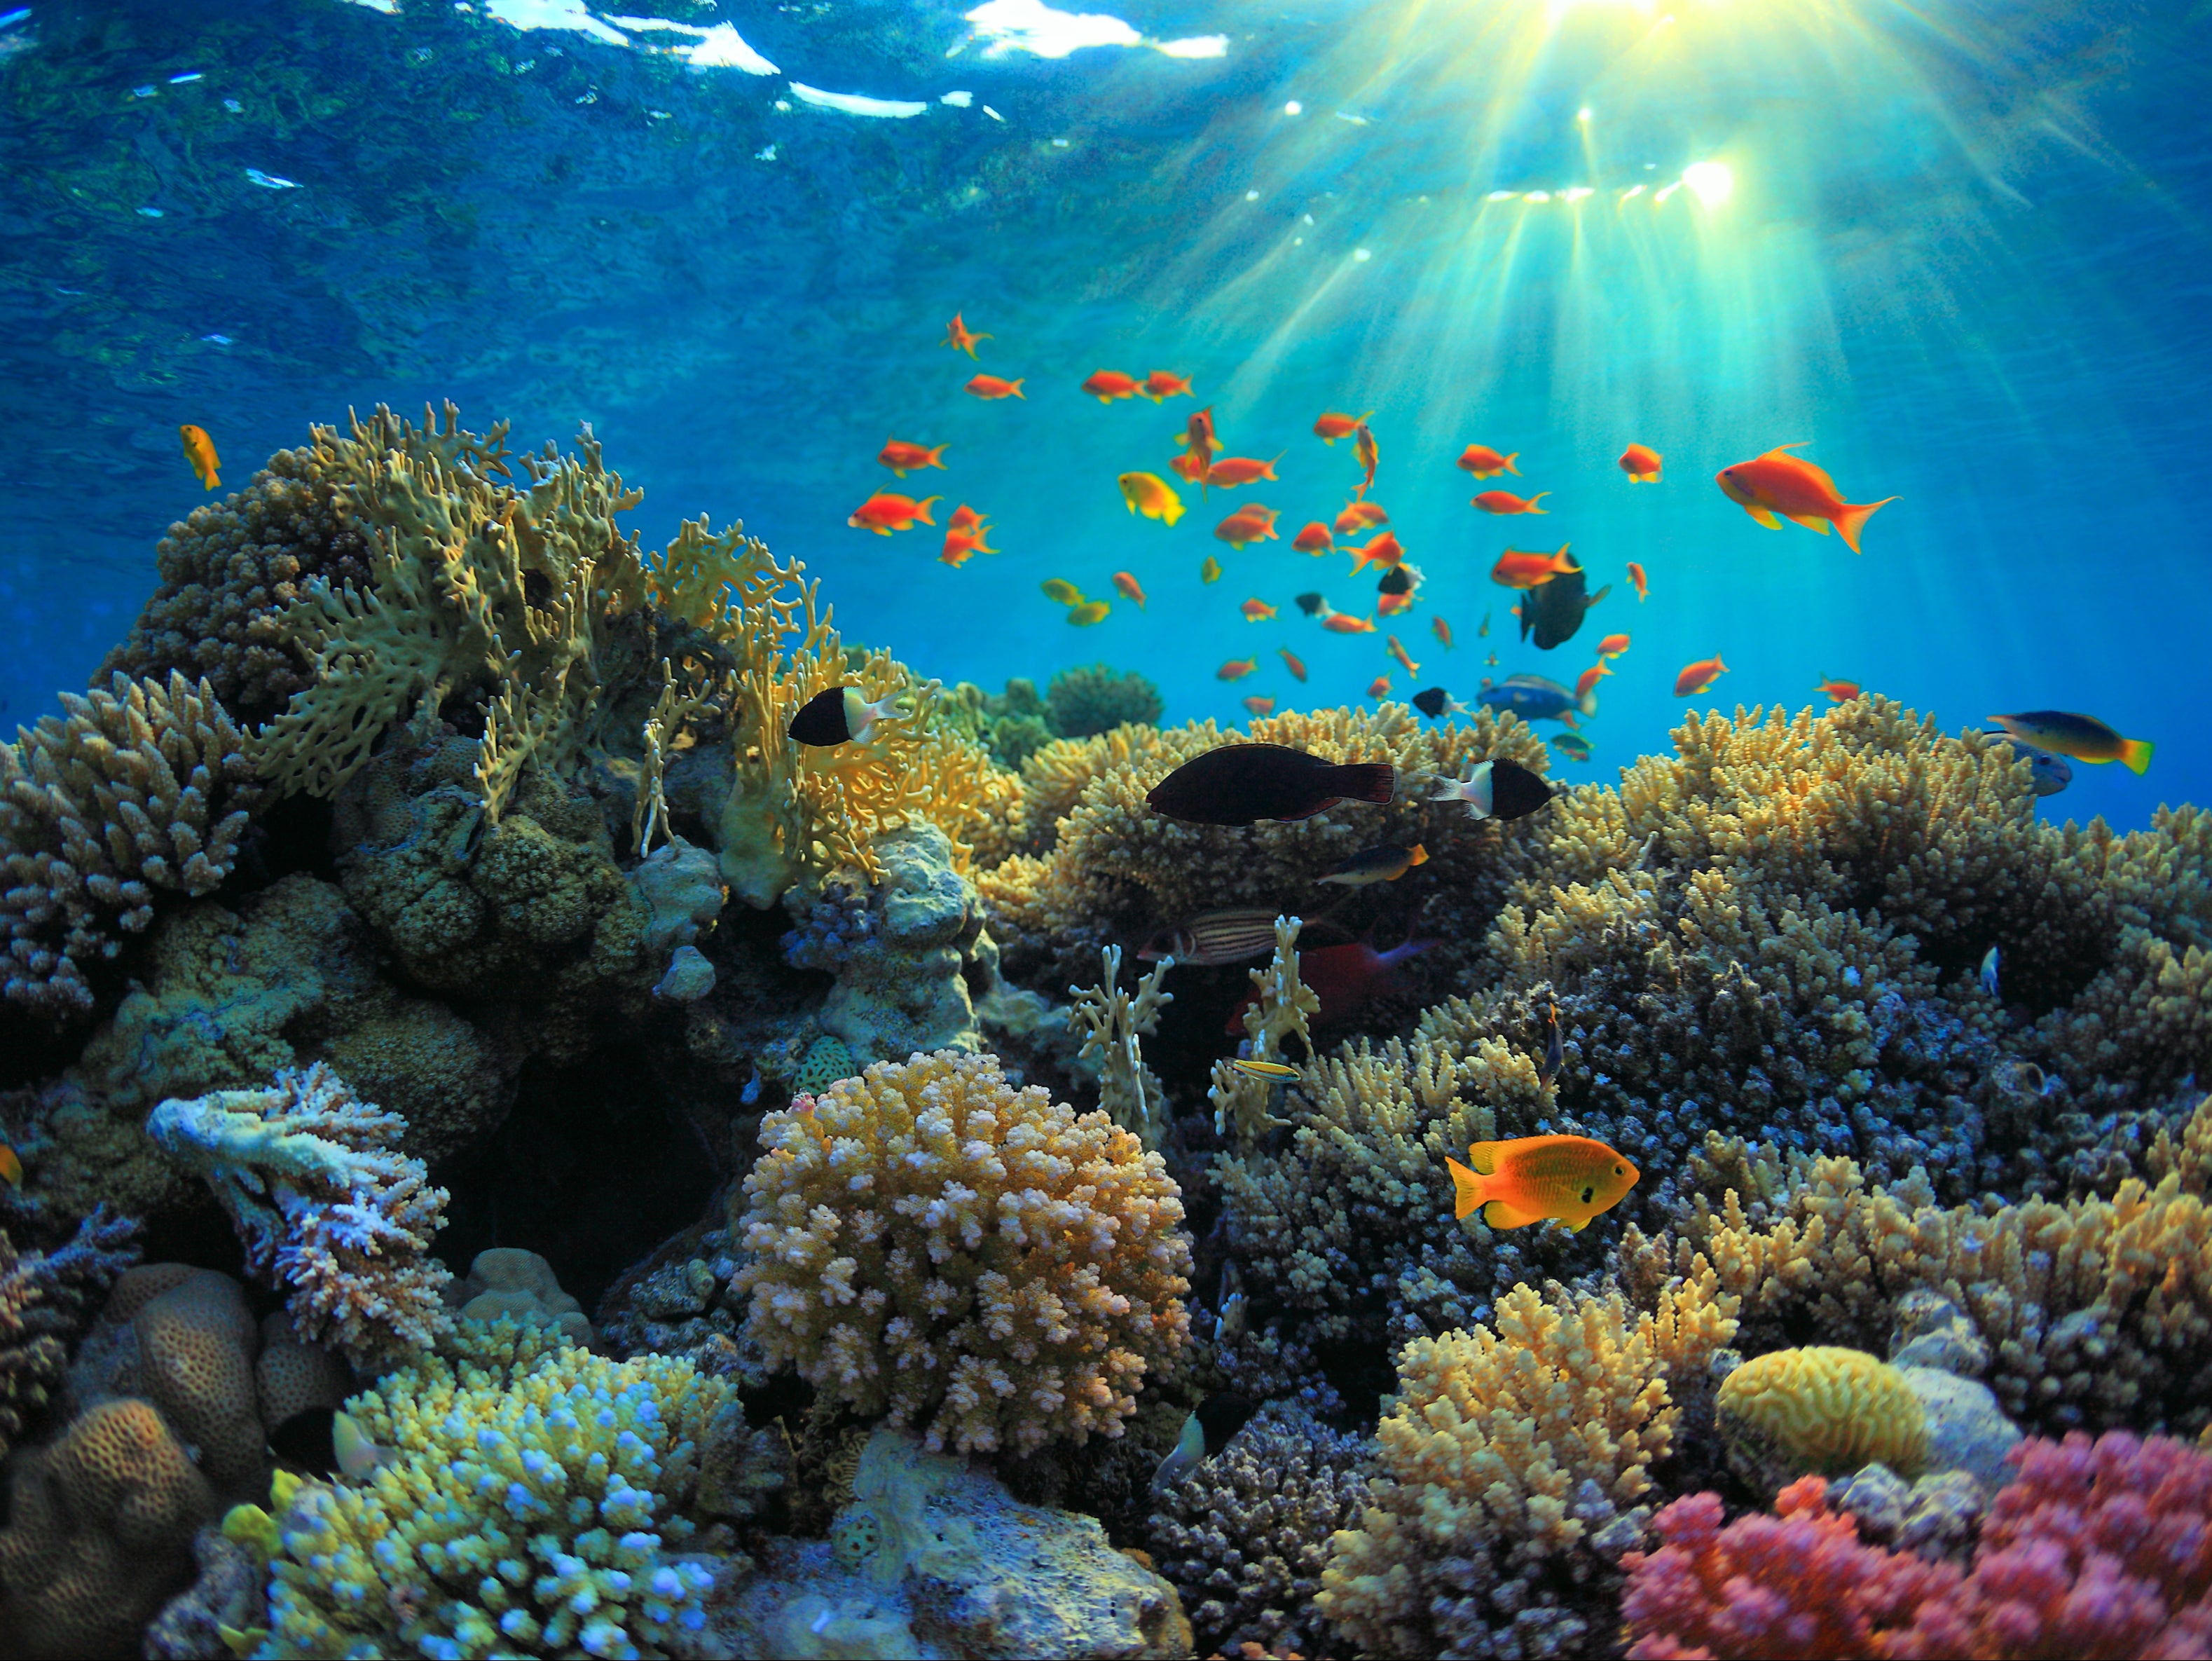 Coral reefs cover only one per cent of the earth’s surface but are critical ecosystems for biodiversity